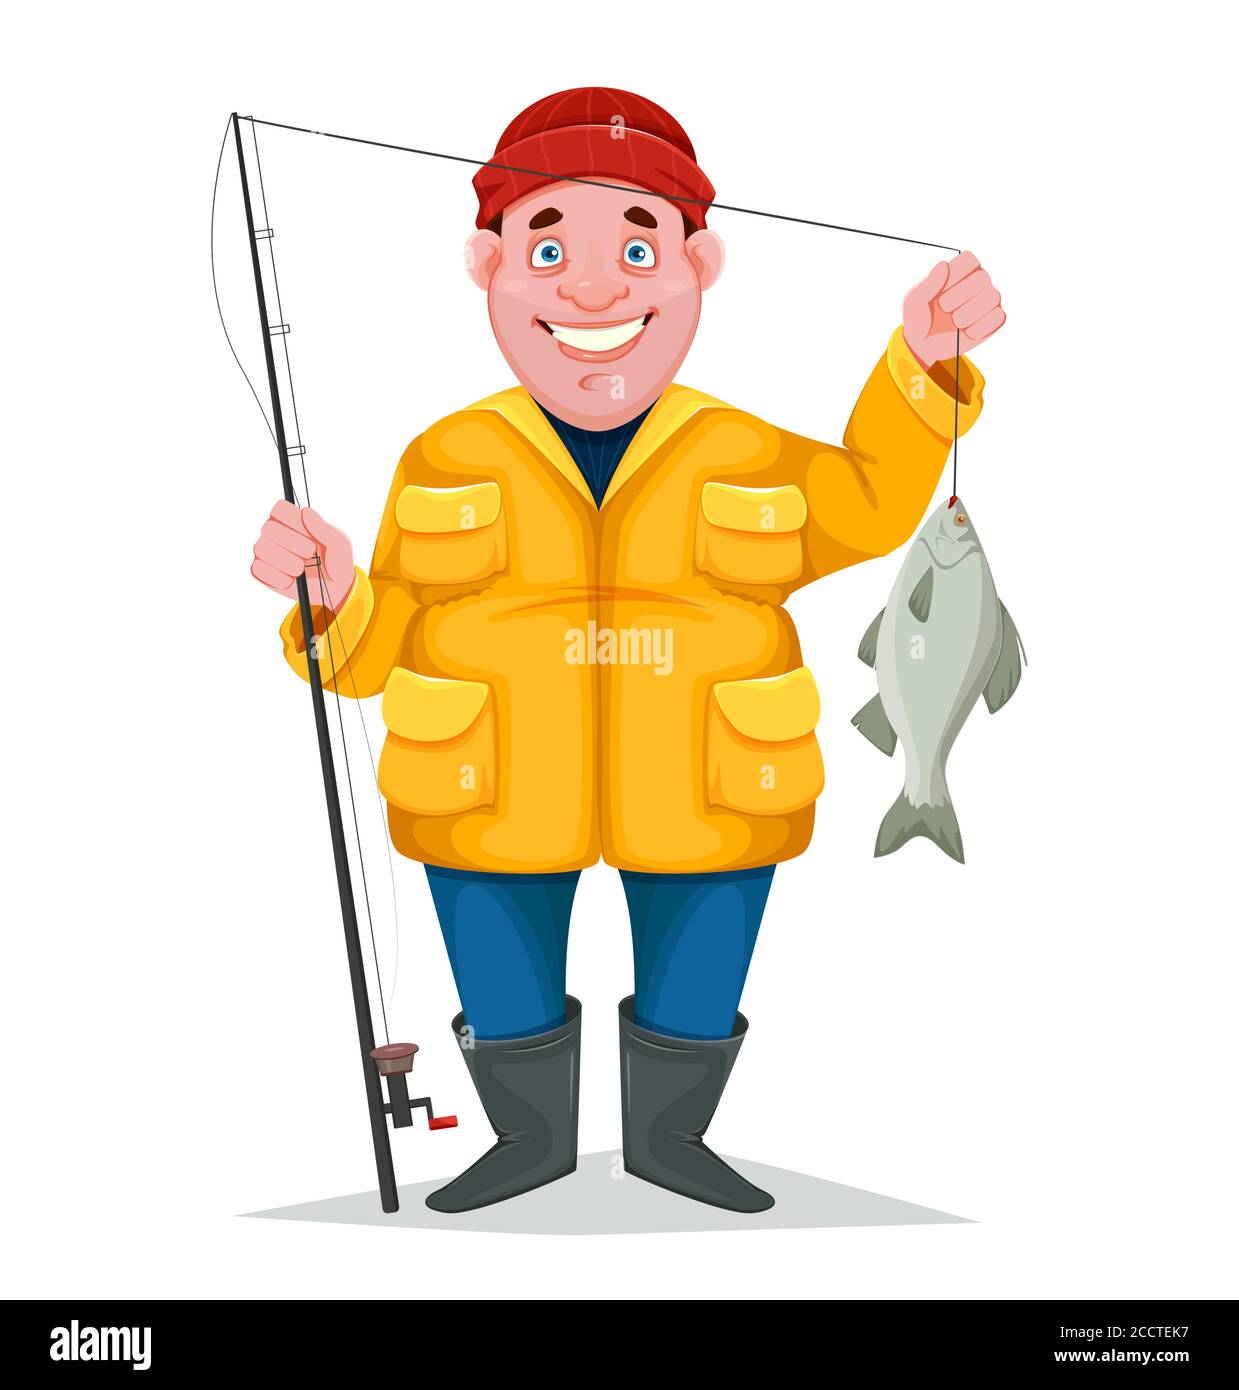 Fisherman with Cut Out Stock Images & Pictures - Page 3 - Alamy